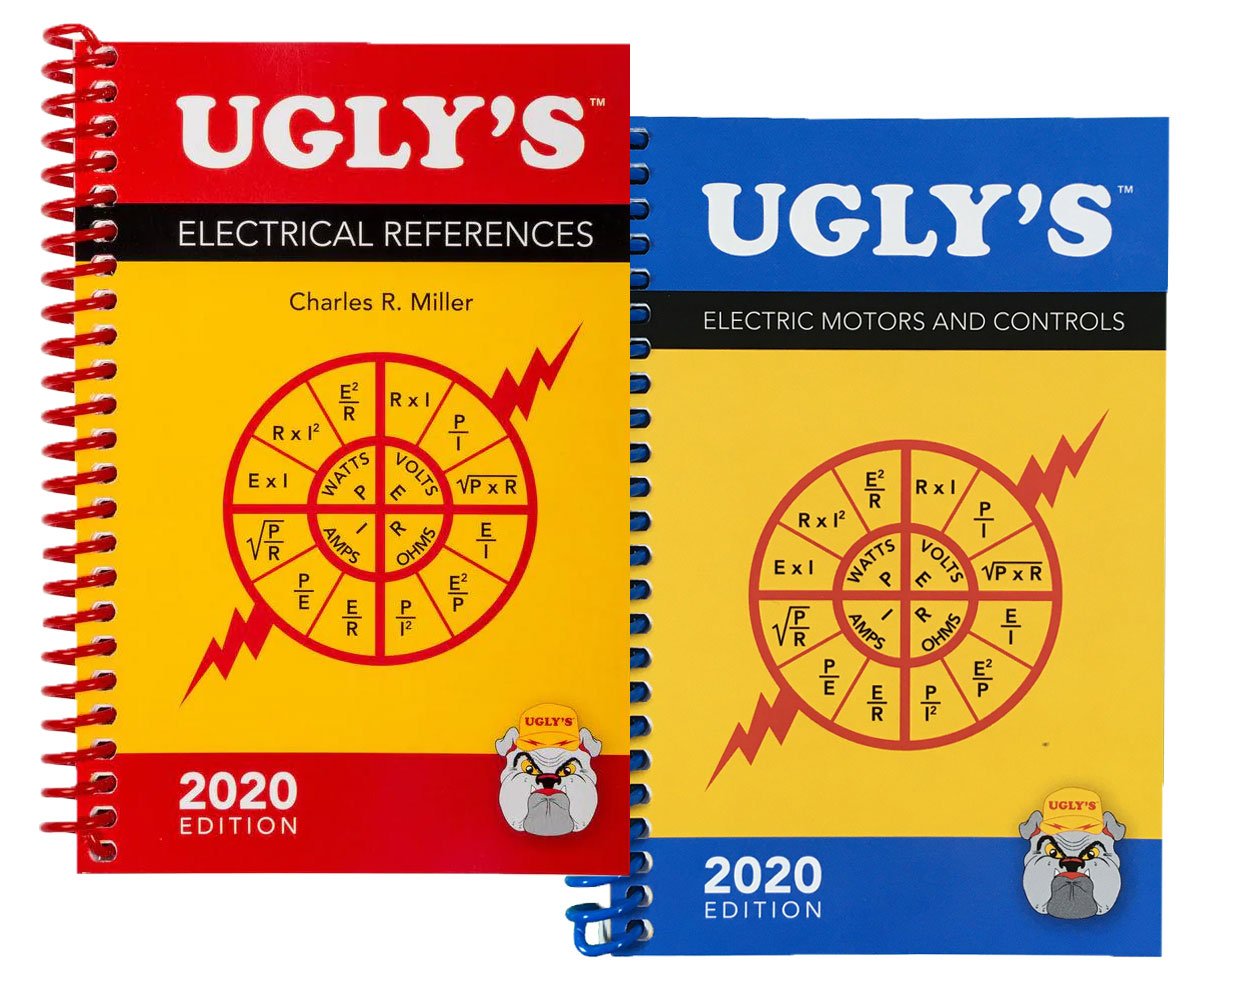 Ugly’s Electrical Reference Books